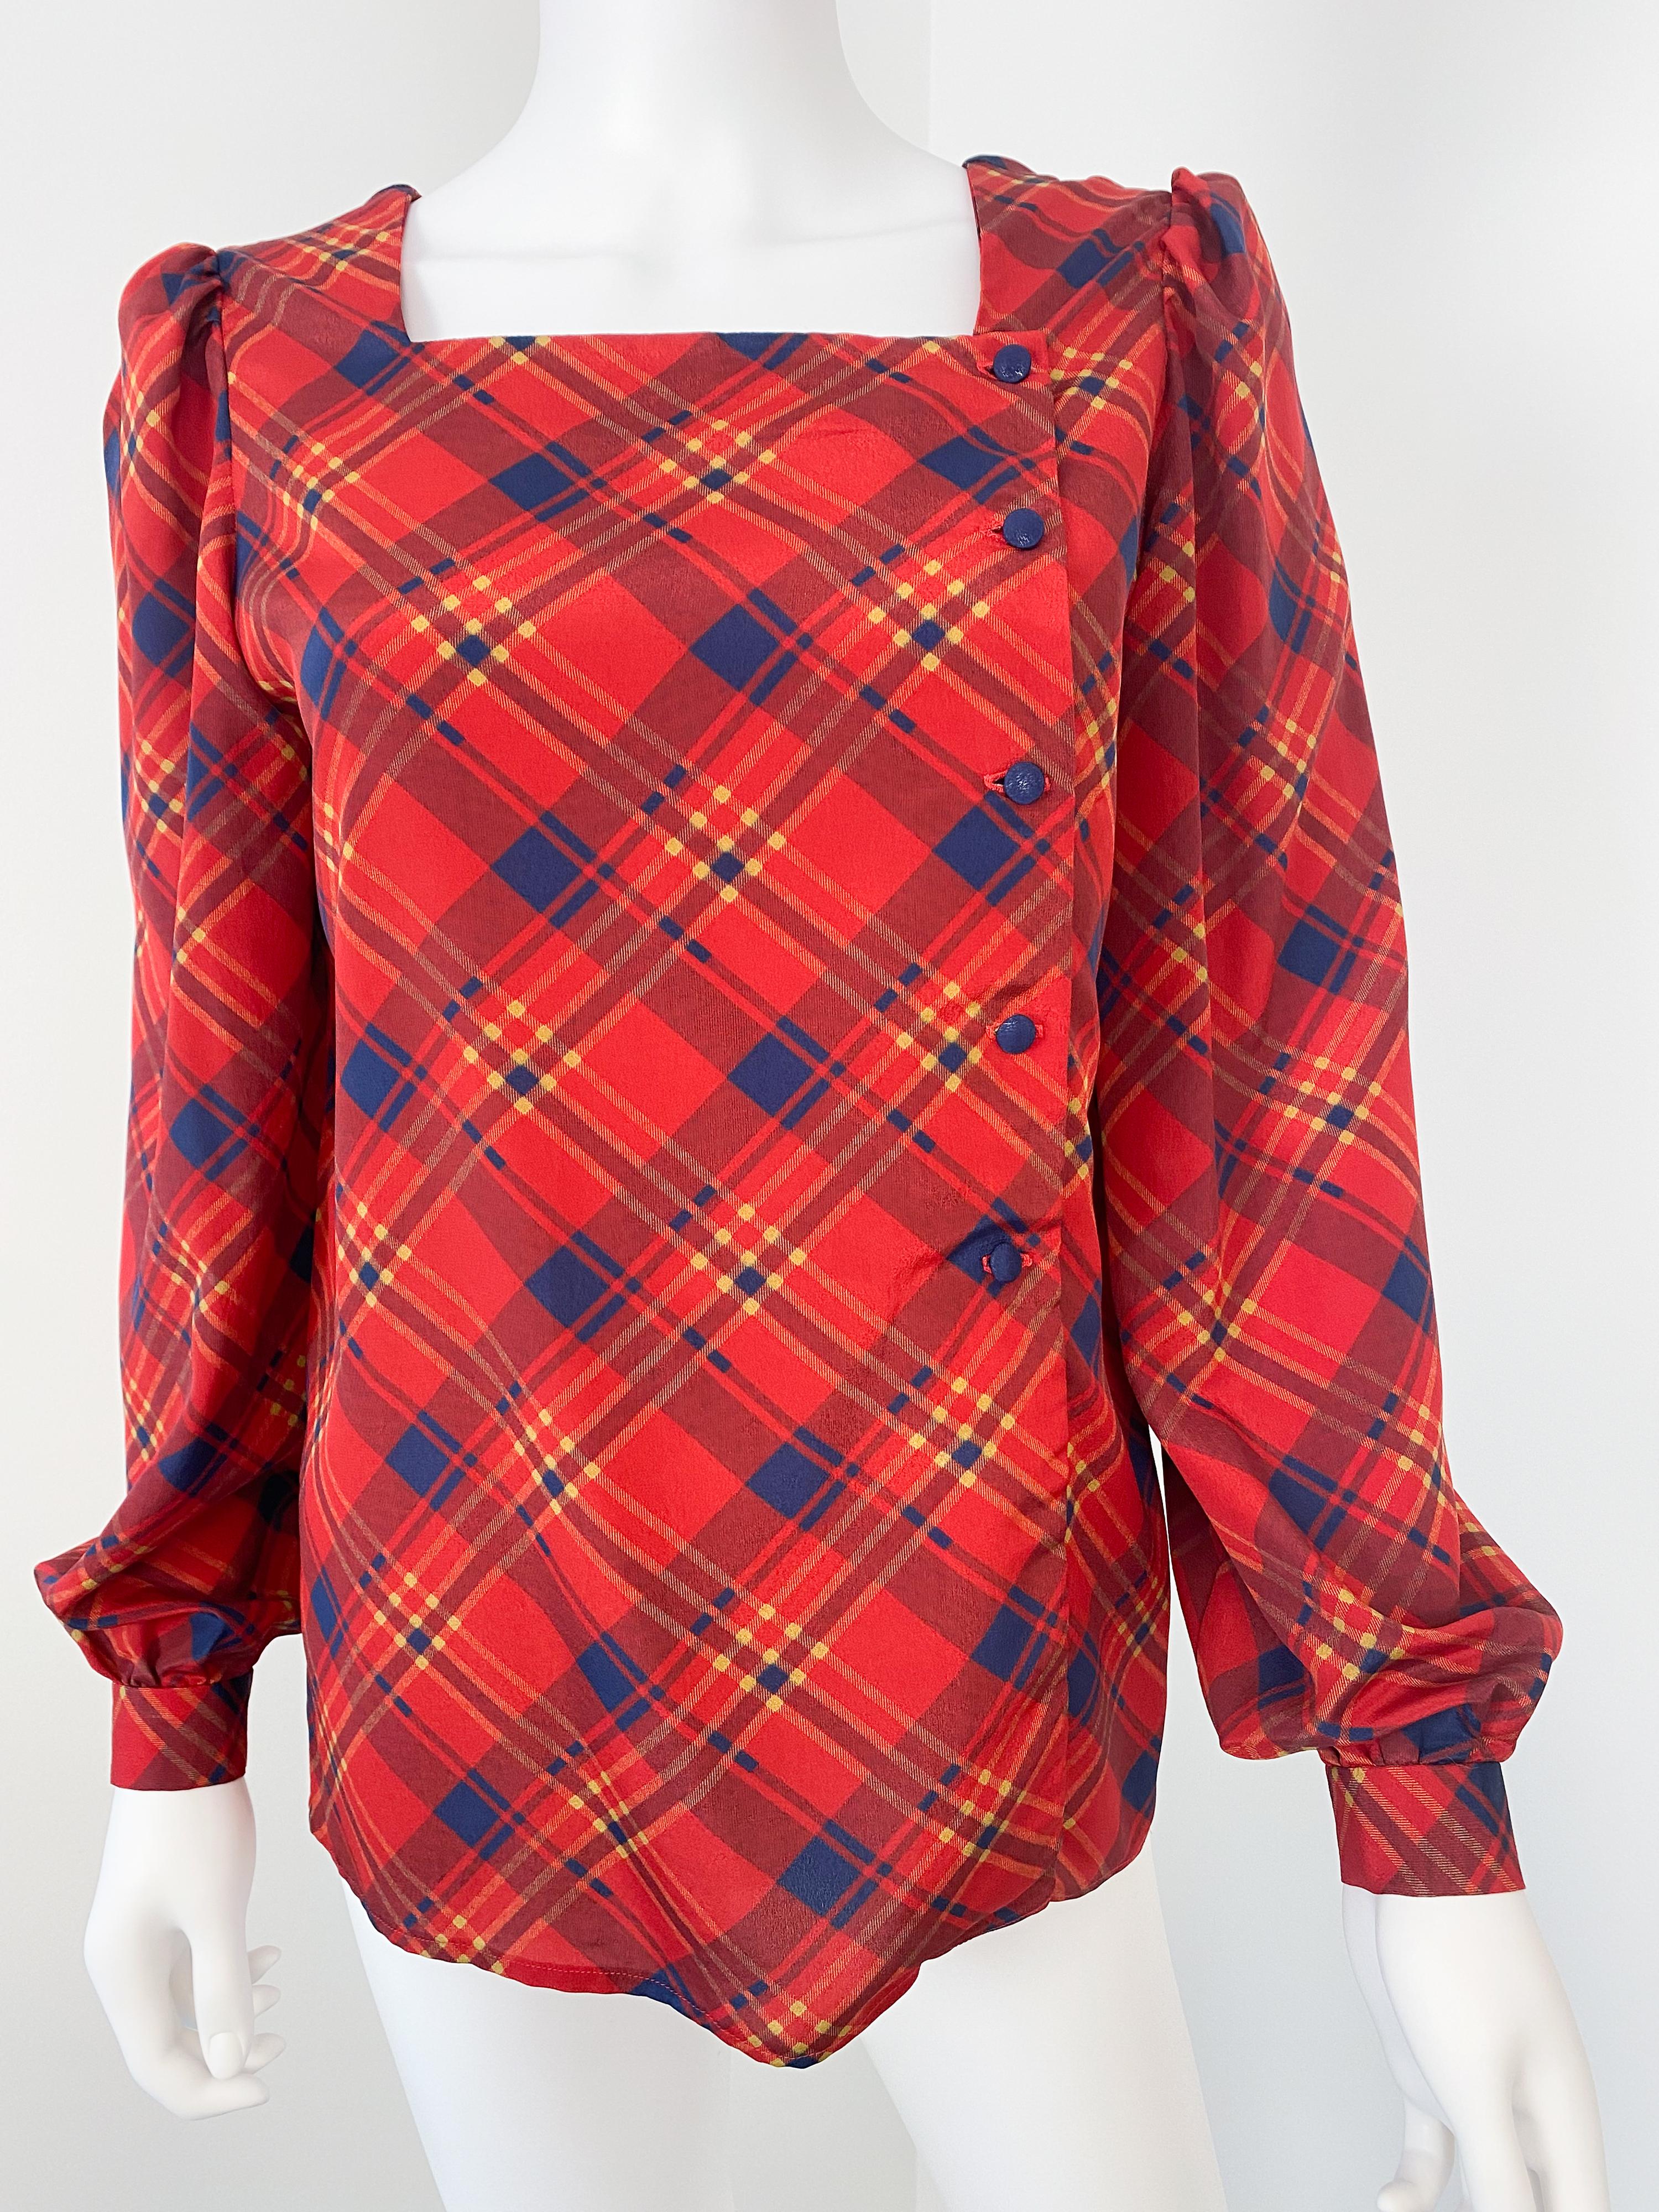 Vintage 1980s Silky Polyester Blouse Top Red and Blue Tartan Size 6/8 For Sale 9